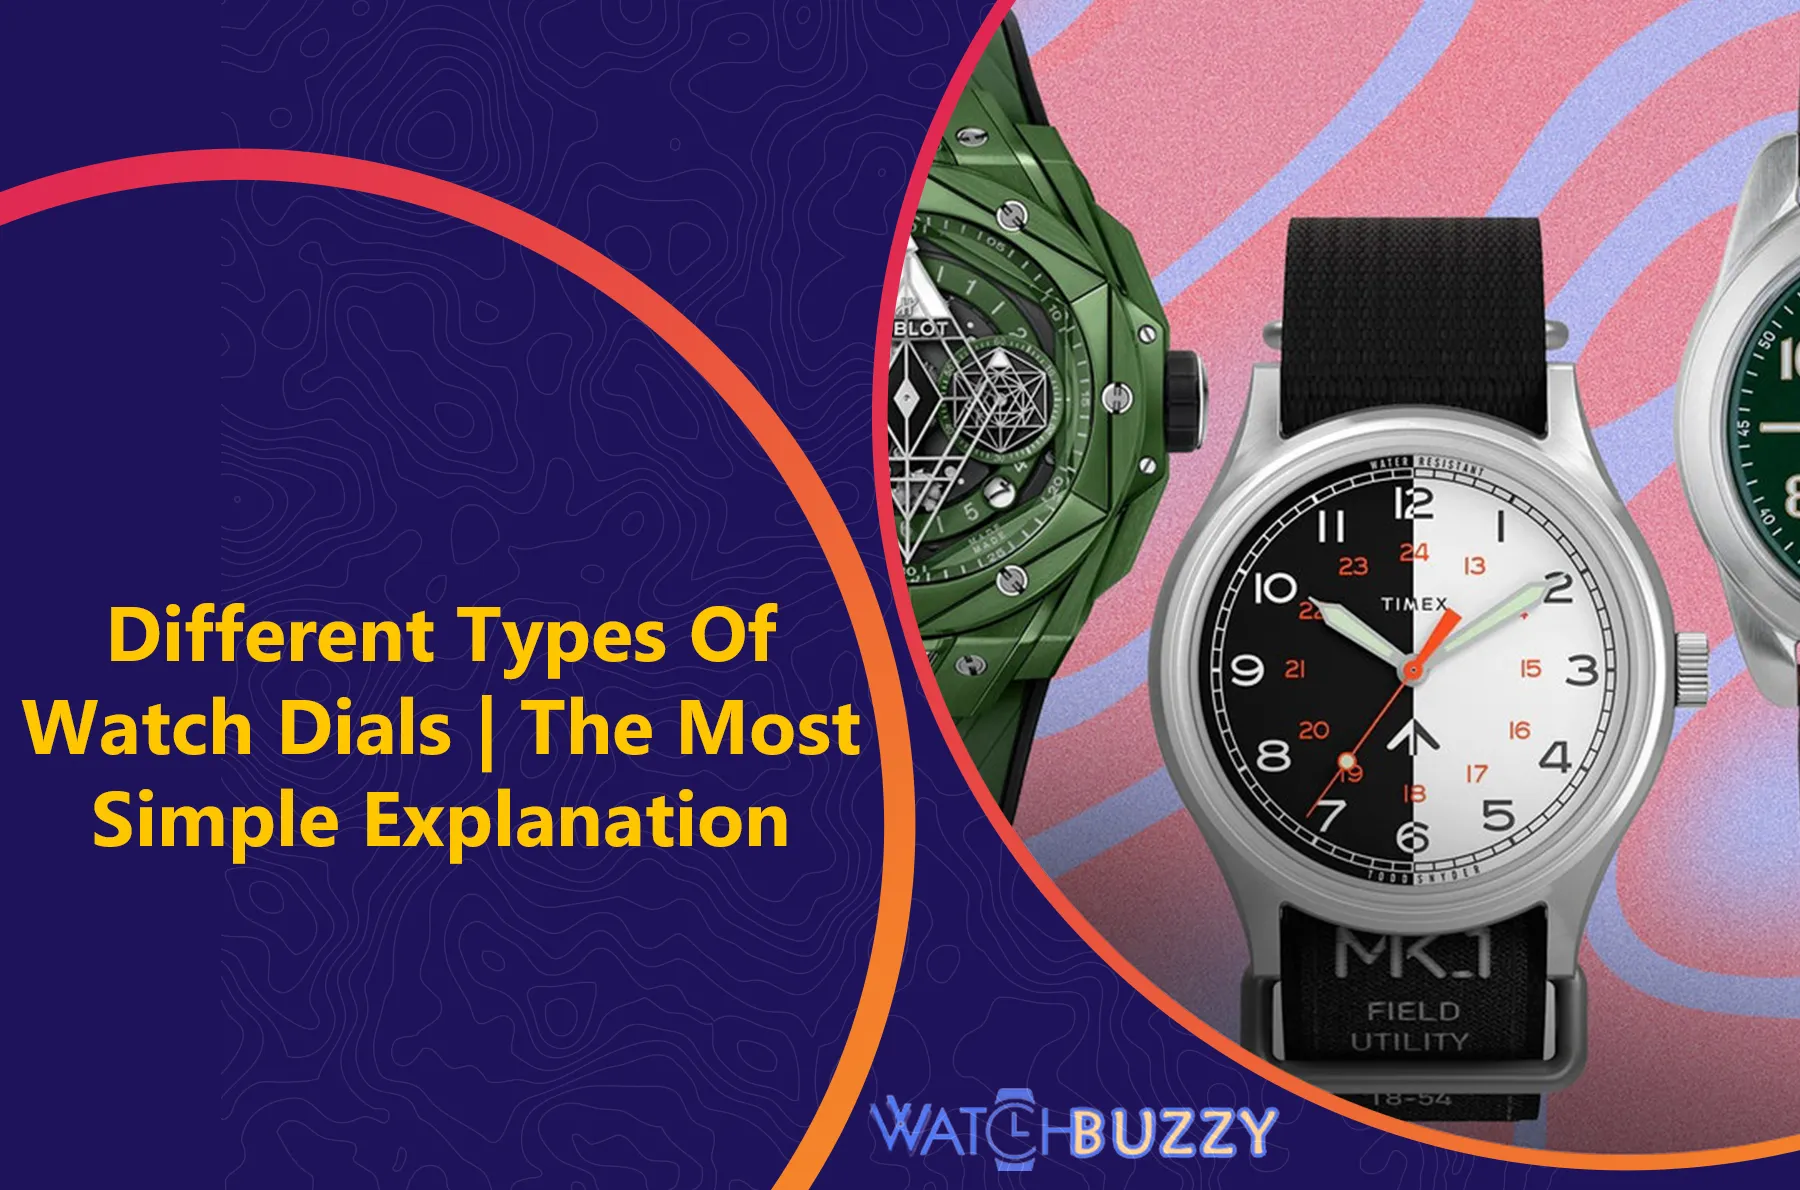 Different Types Of Watch Dials | The Most Simple Explanation